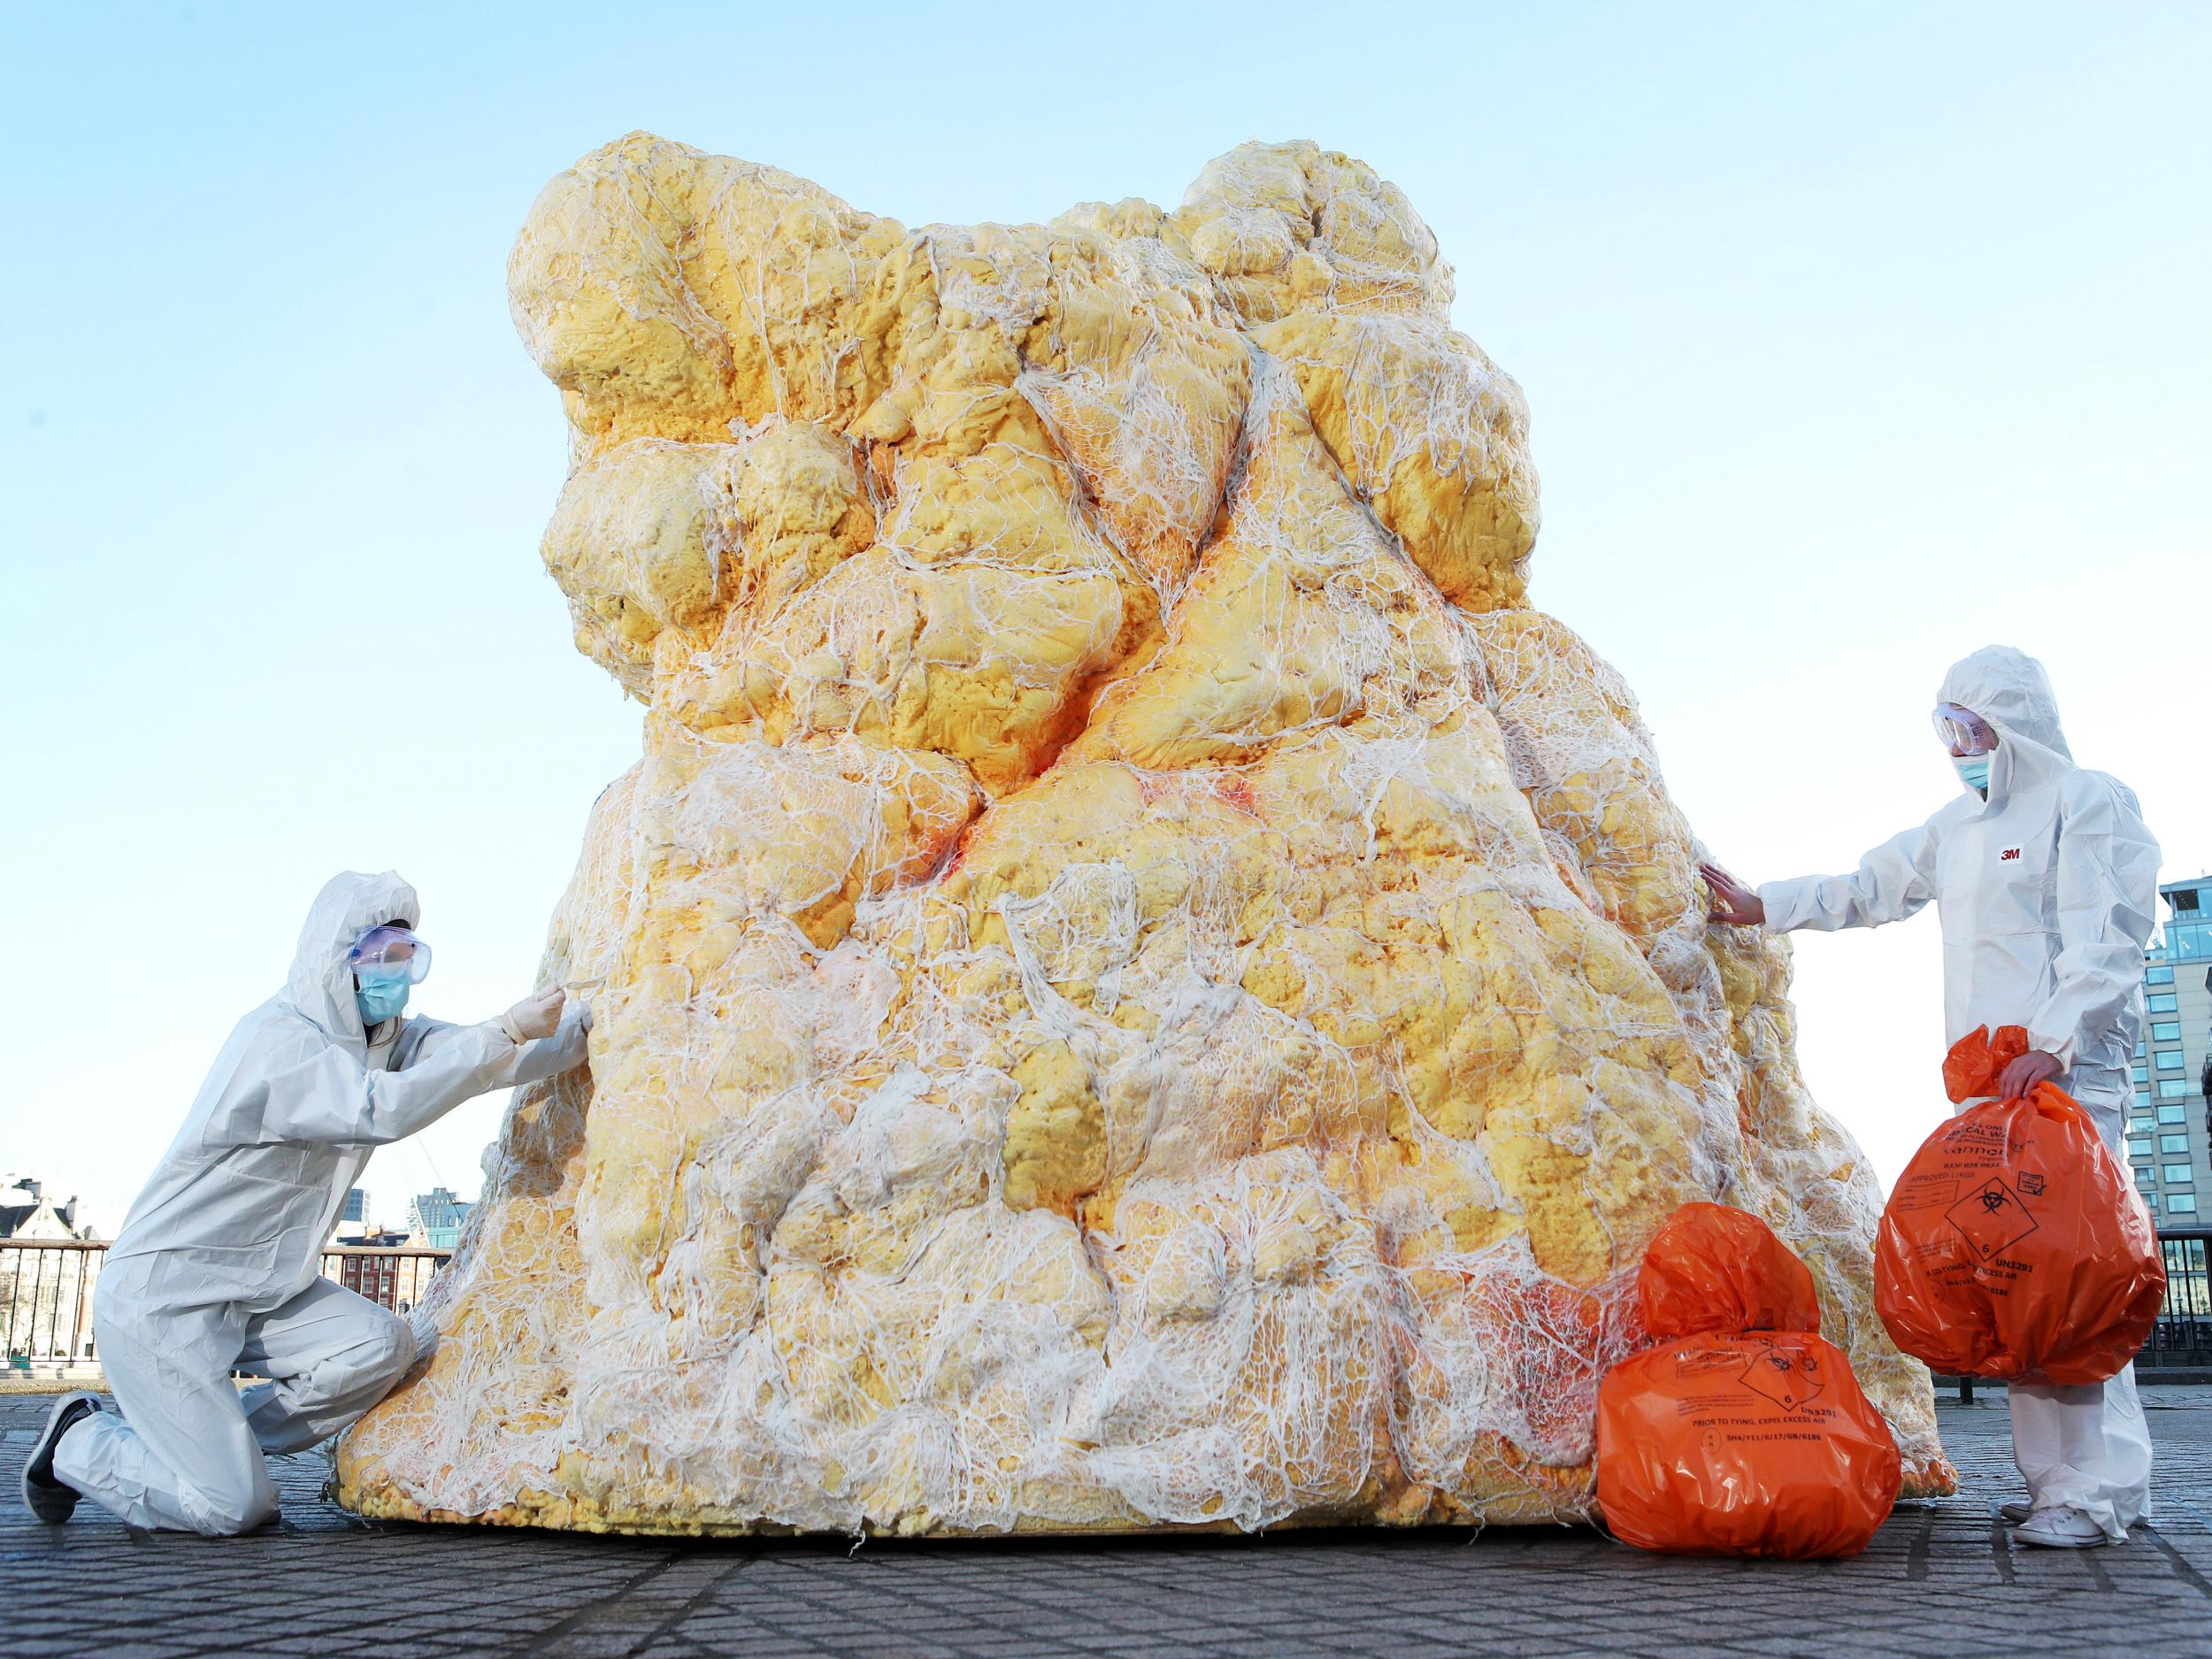 A gigantic lump of real fat measuring 12 feet high appears in London to shock Brits into assessing blood health